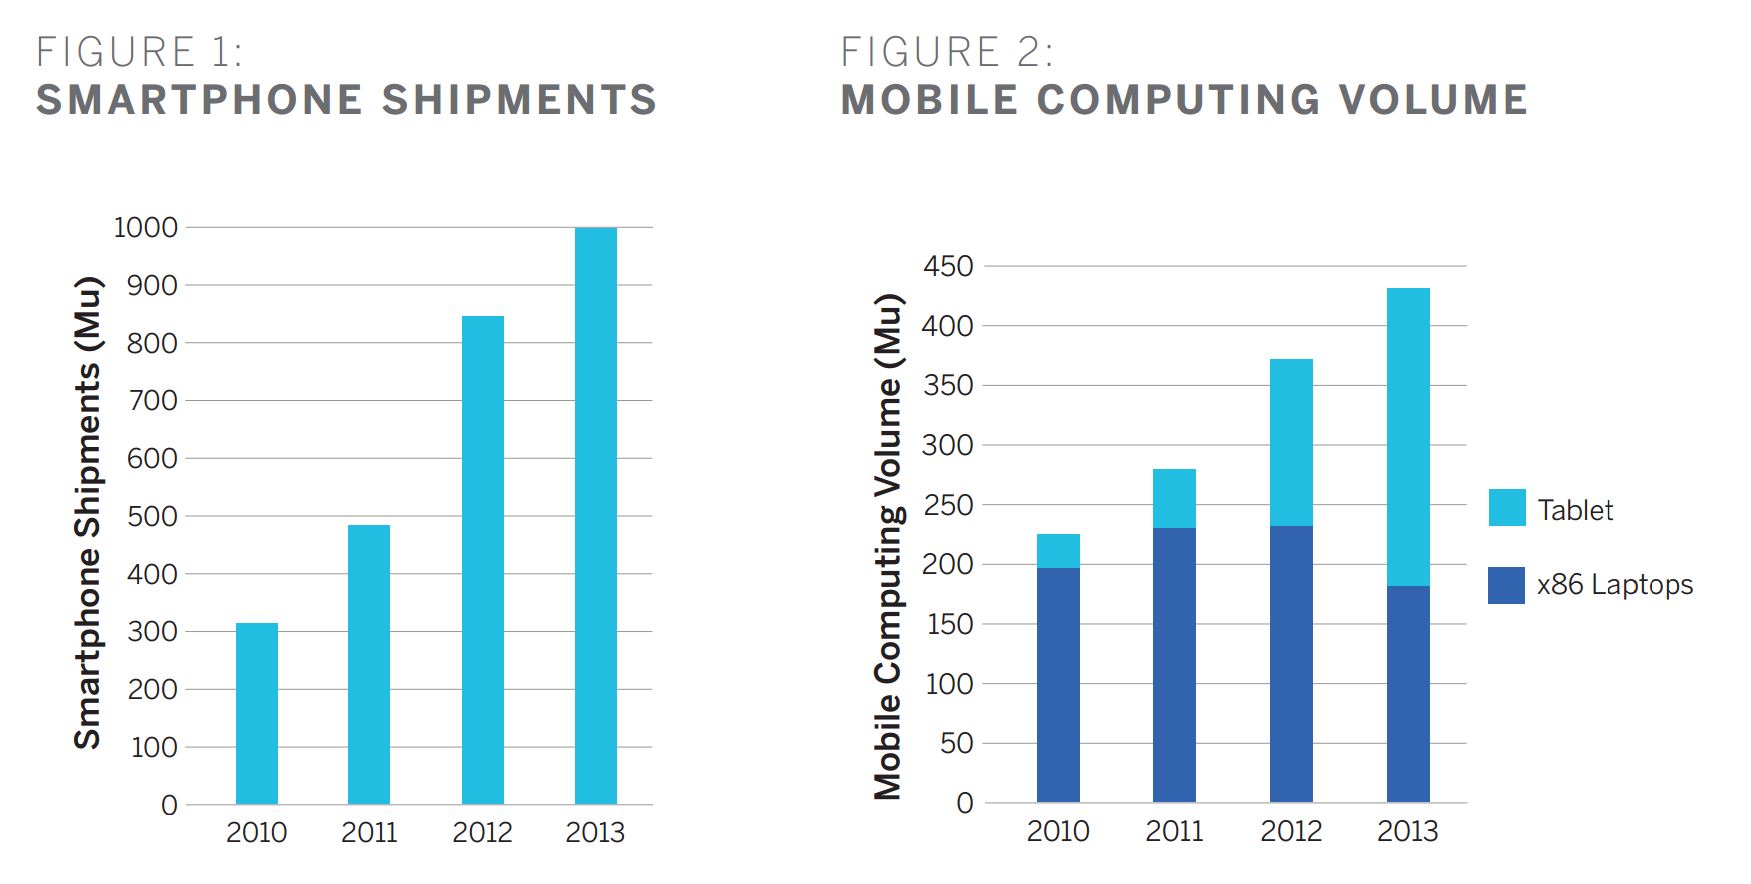 Smartphone shipments up to 2013